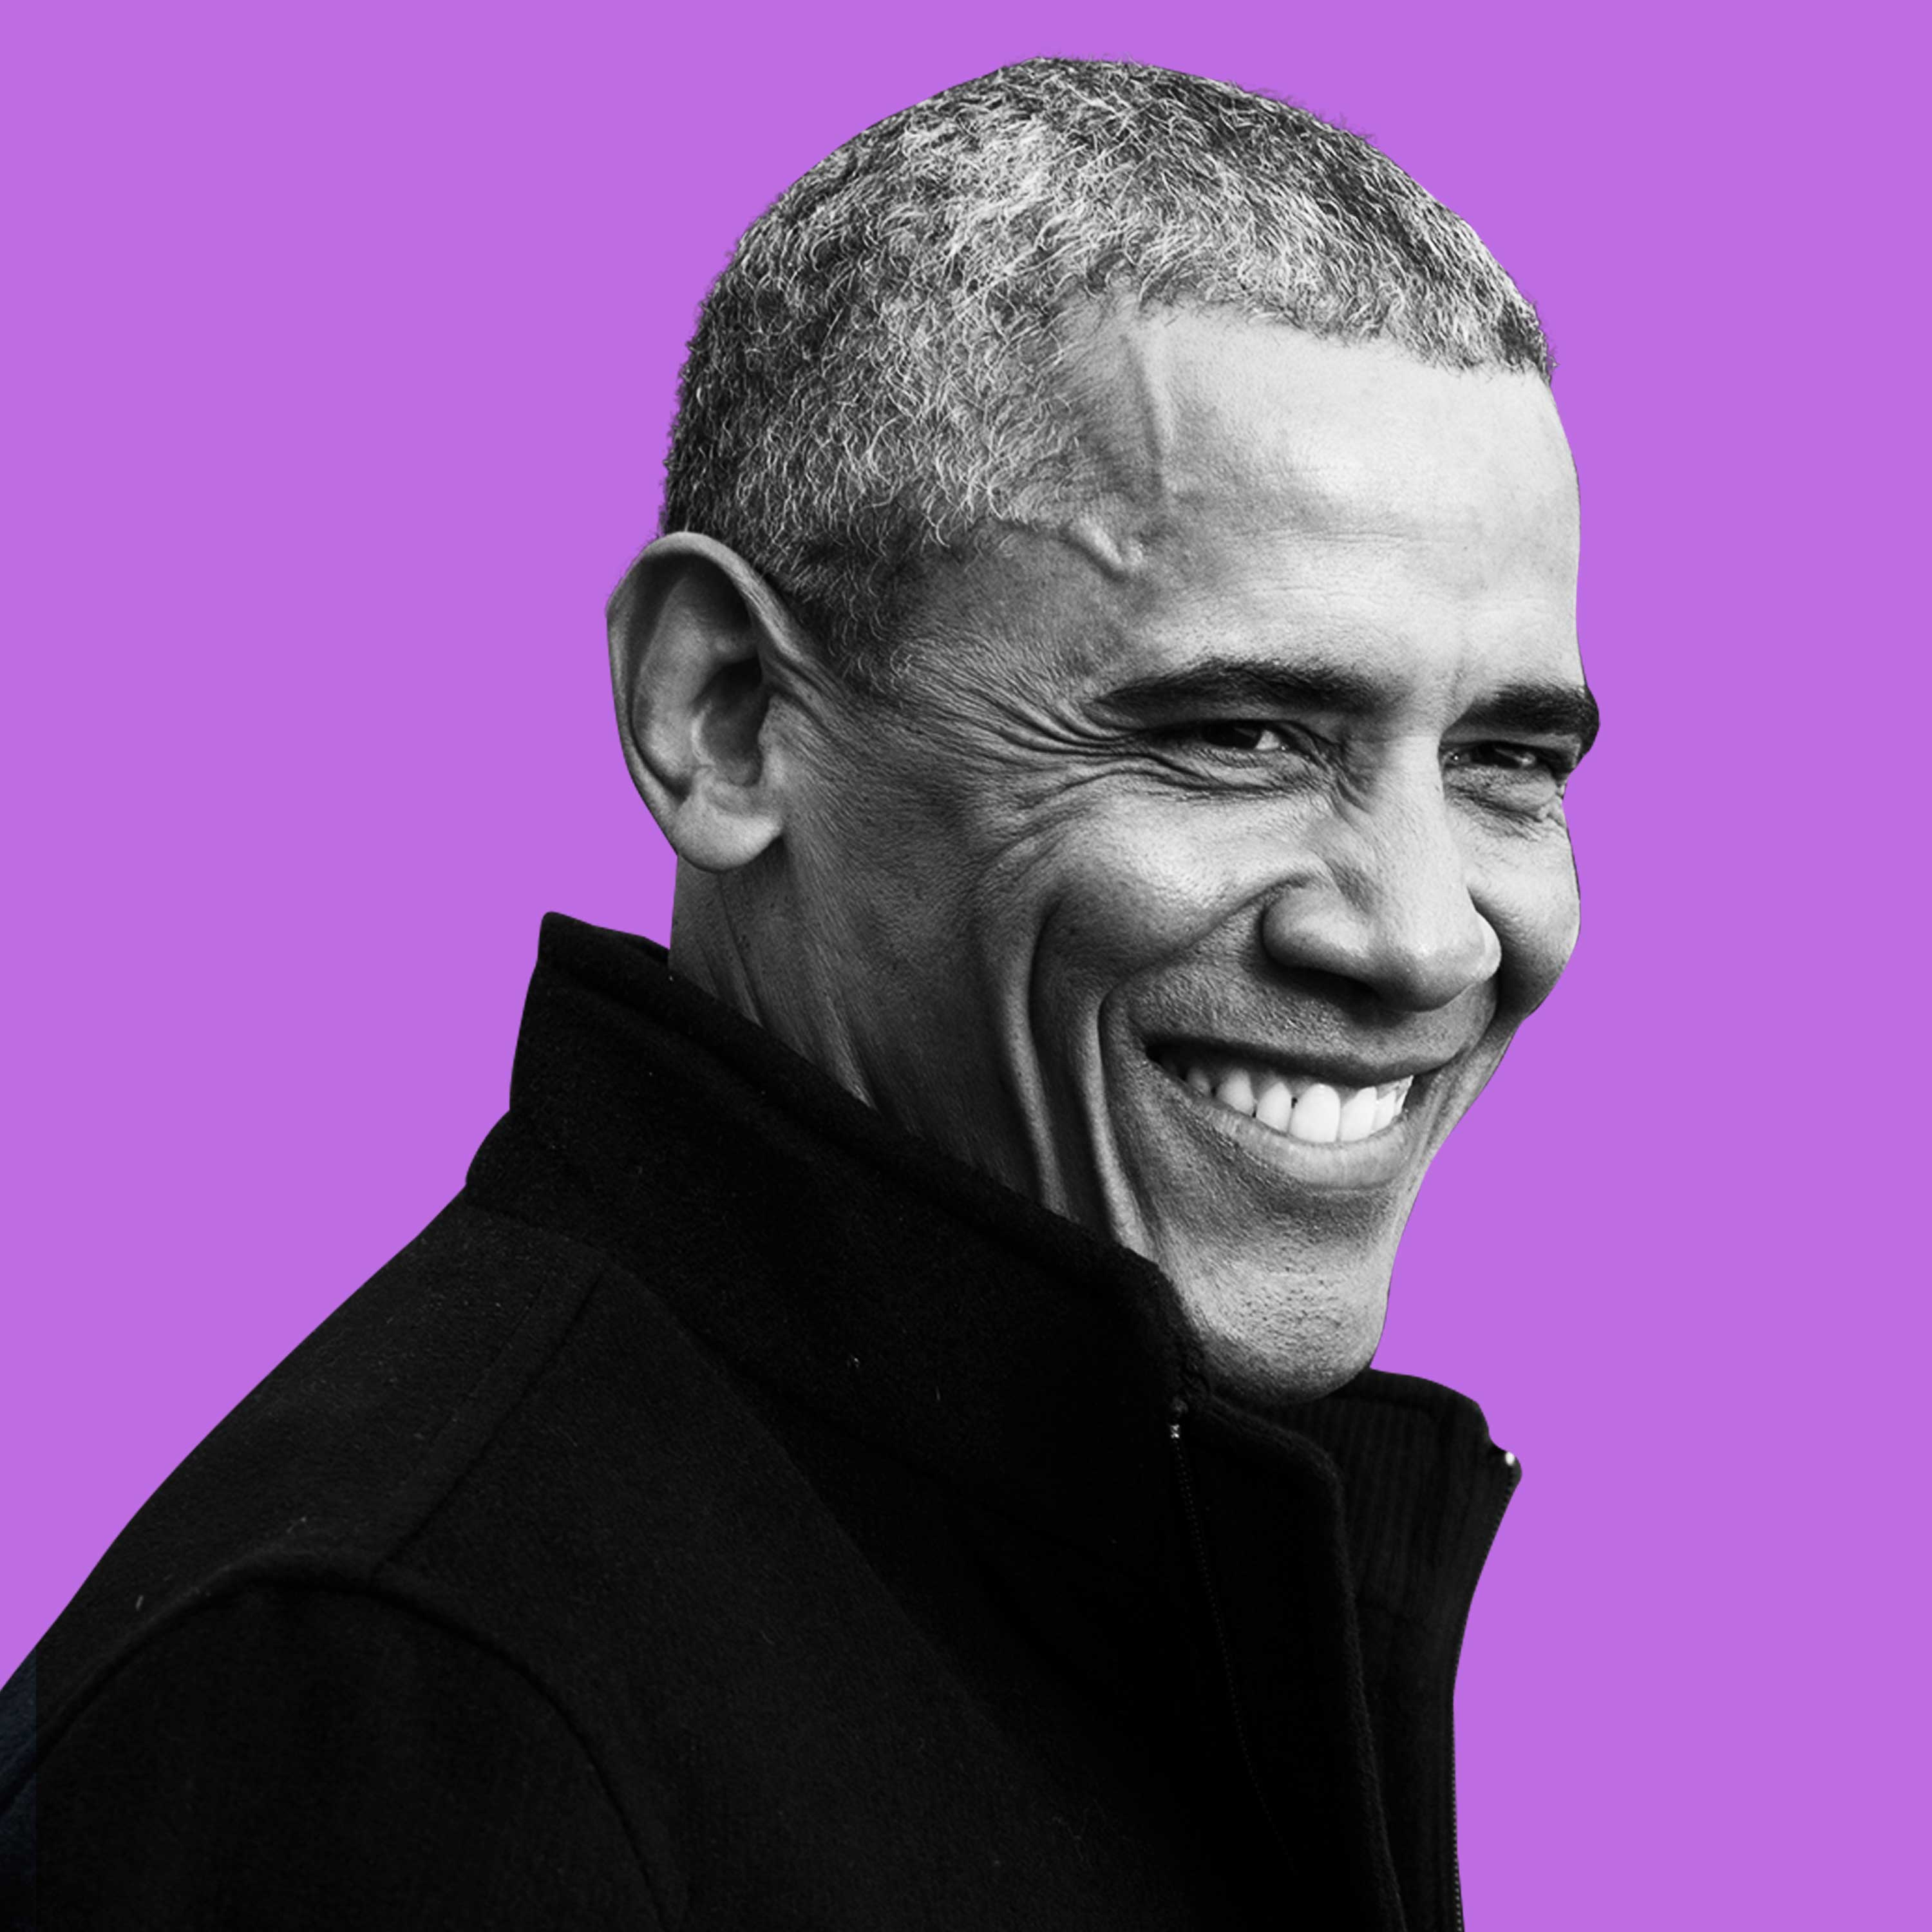 Barack Obama Returns To The Political Arena For The First Time Since Leaving the White House